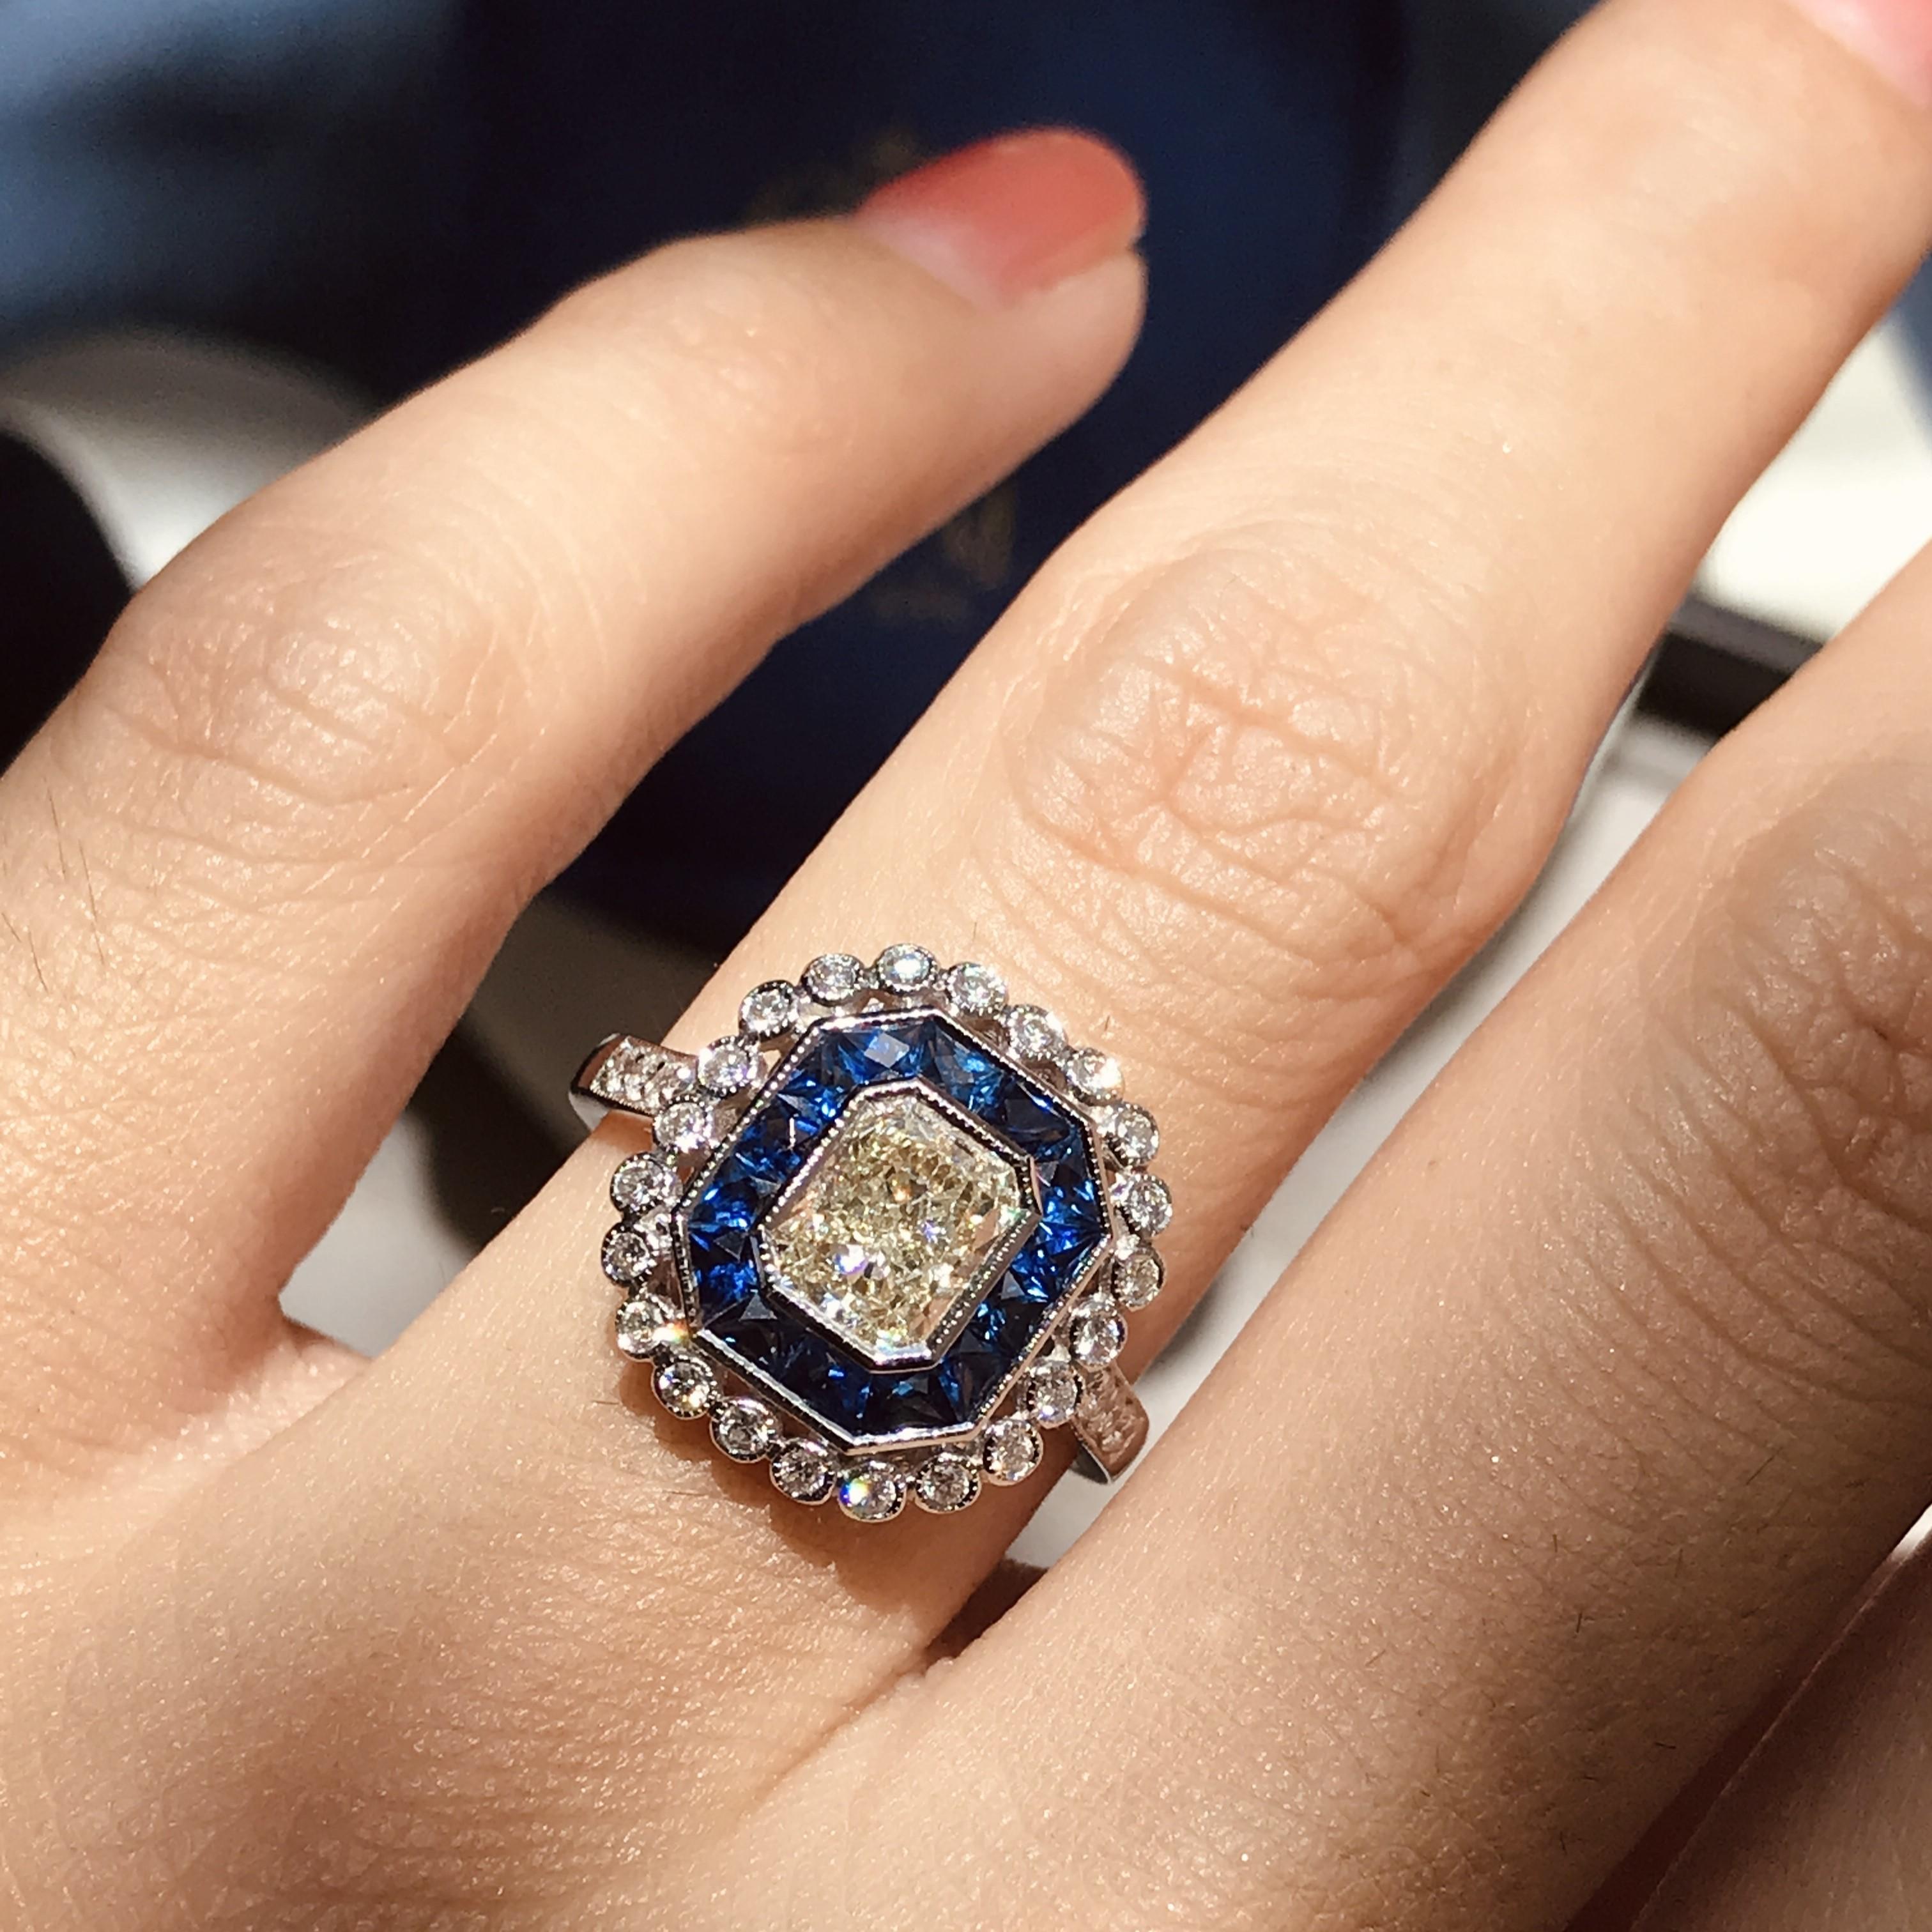 An 18k white gold Art-Deco design diamond and sapphire target ring, center K/VS diamond with an outer ring of round diamonds an inner one of French cut sapphires and finished with millgrain edging, finished with diamond shoulders.

Ring